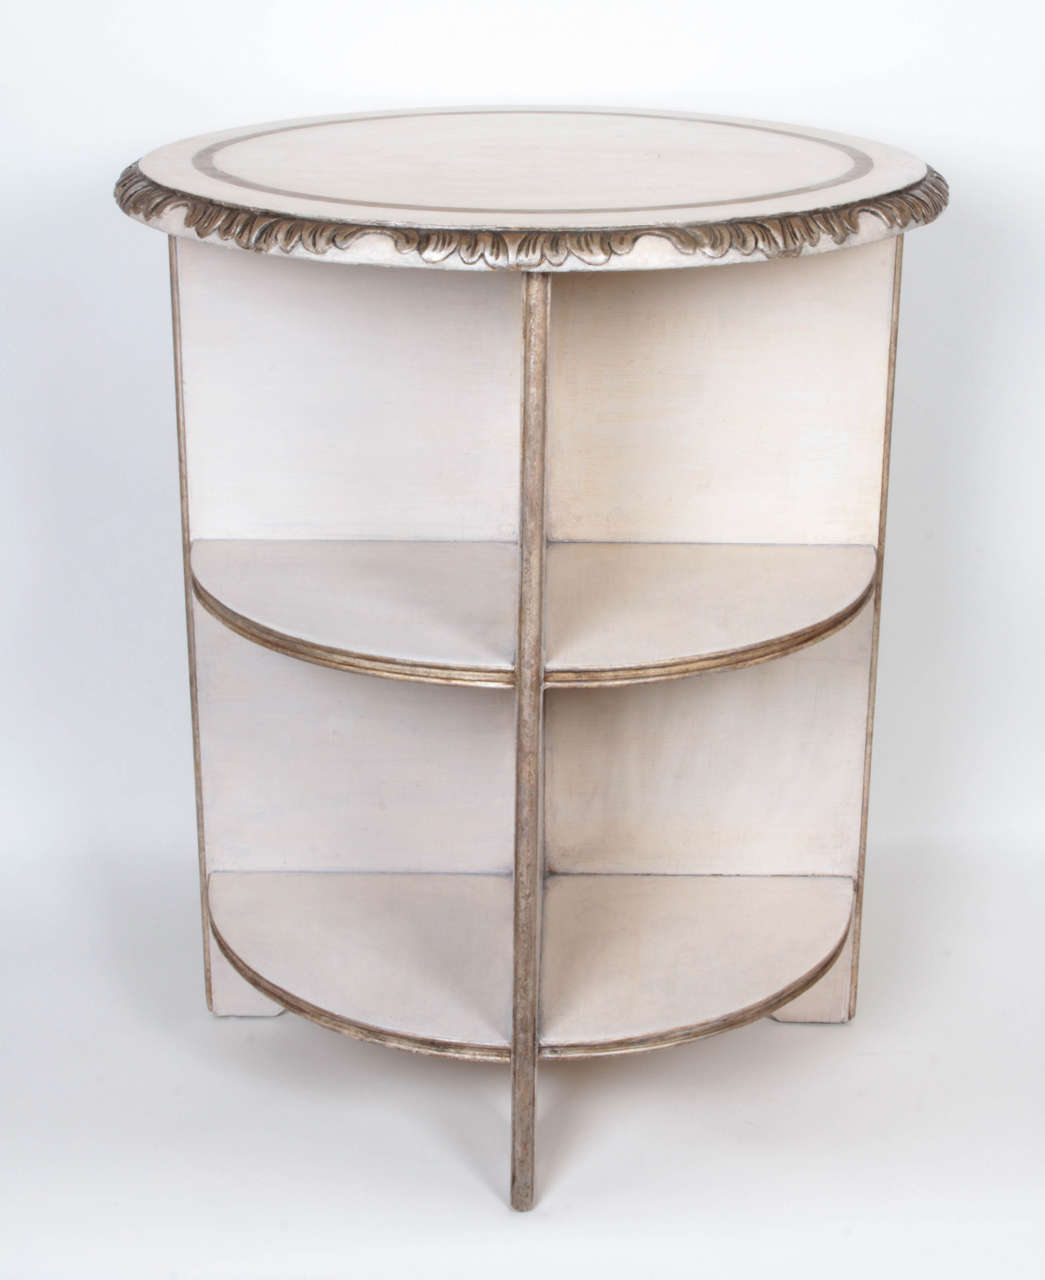 A 1930s side table by Syrie Maugham, with silver-leafing and a craqueleur-paint finish.